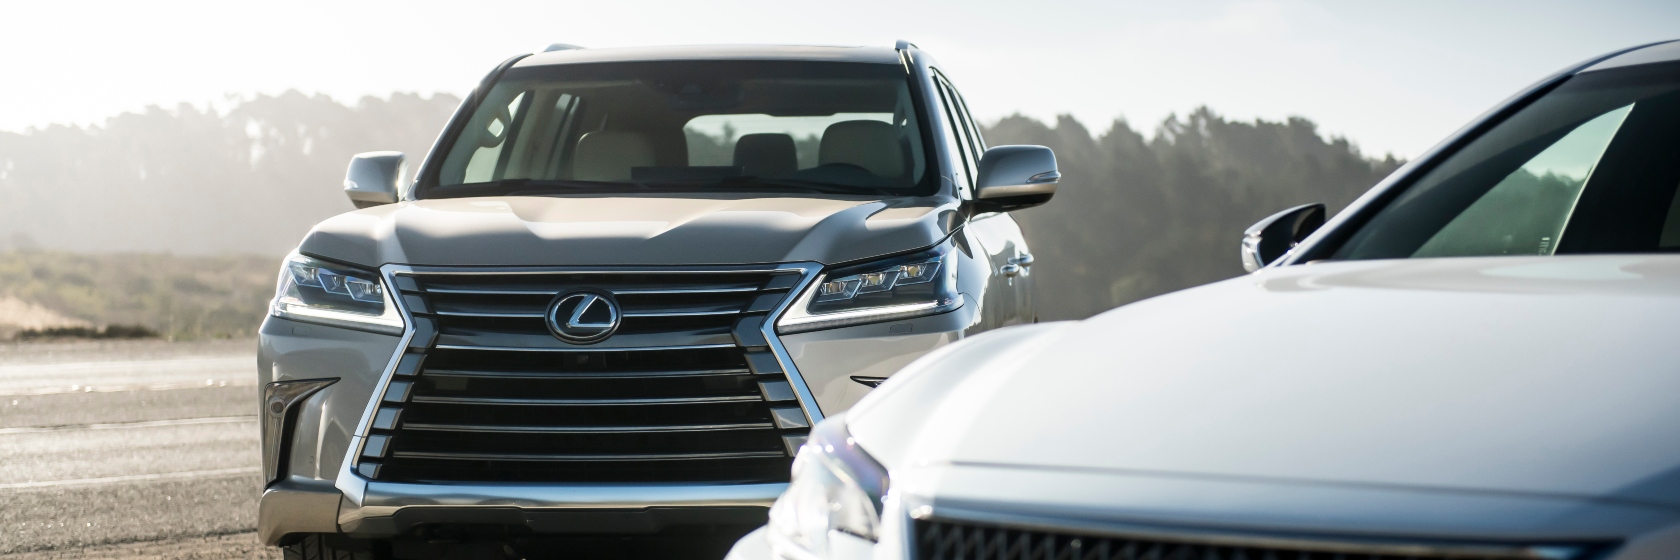 the-best-used-lexus-models-for-your-budget